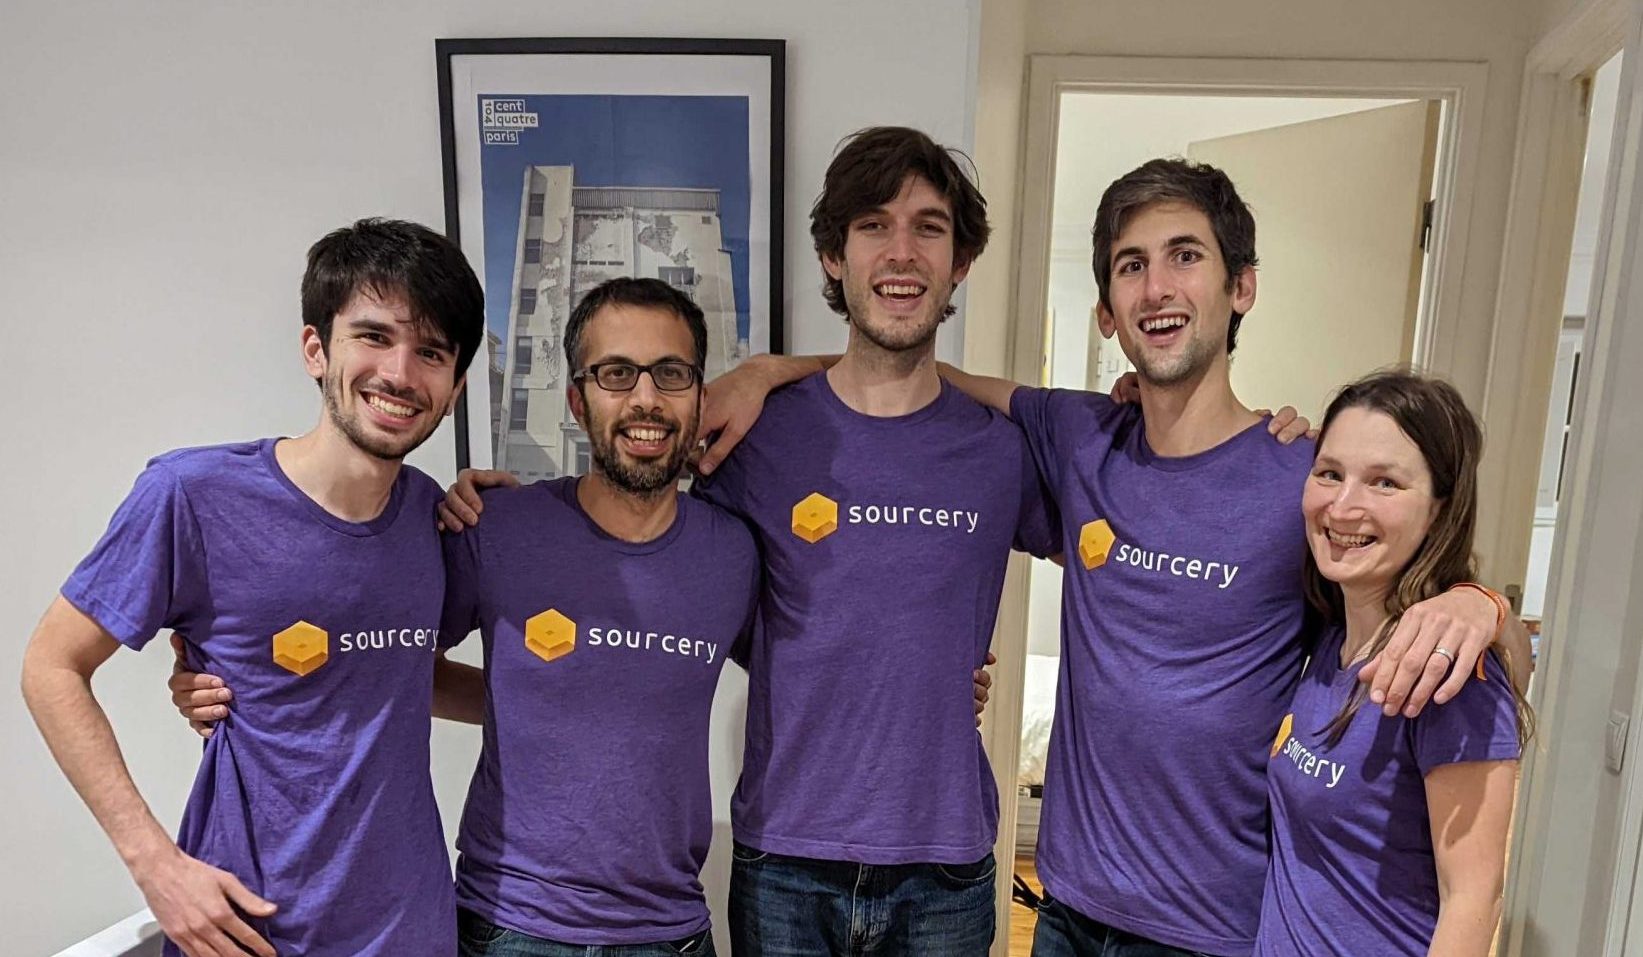 Sourcery.ai secures £1.28 million Seed funding round led by Forward Partners